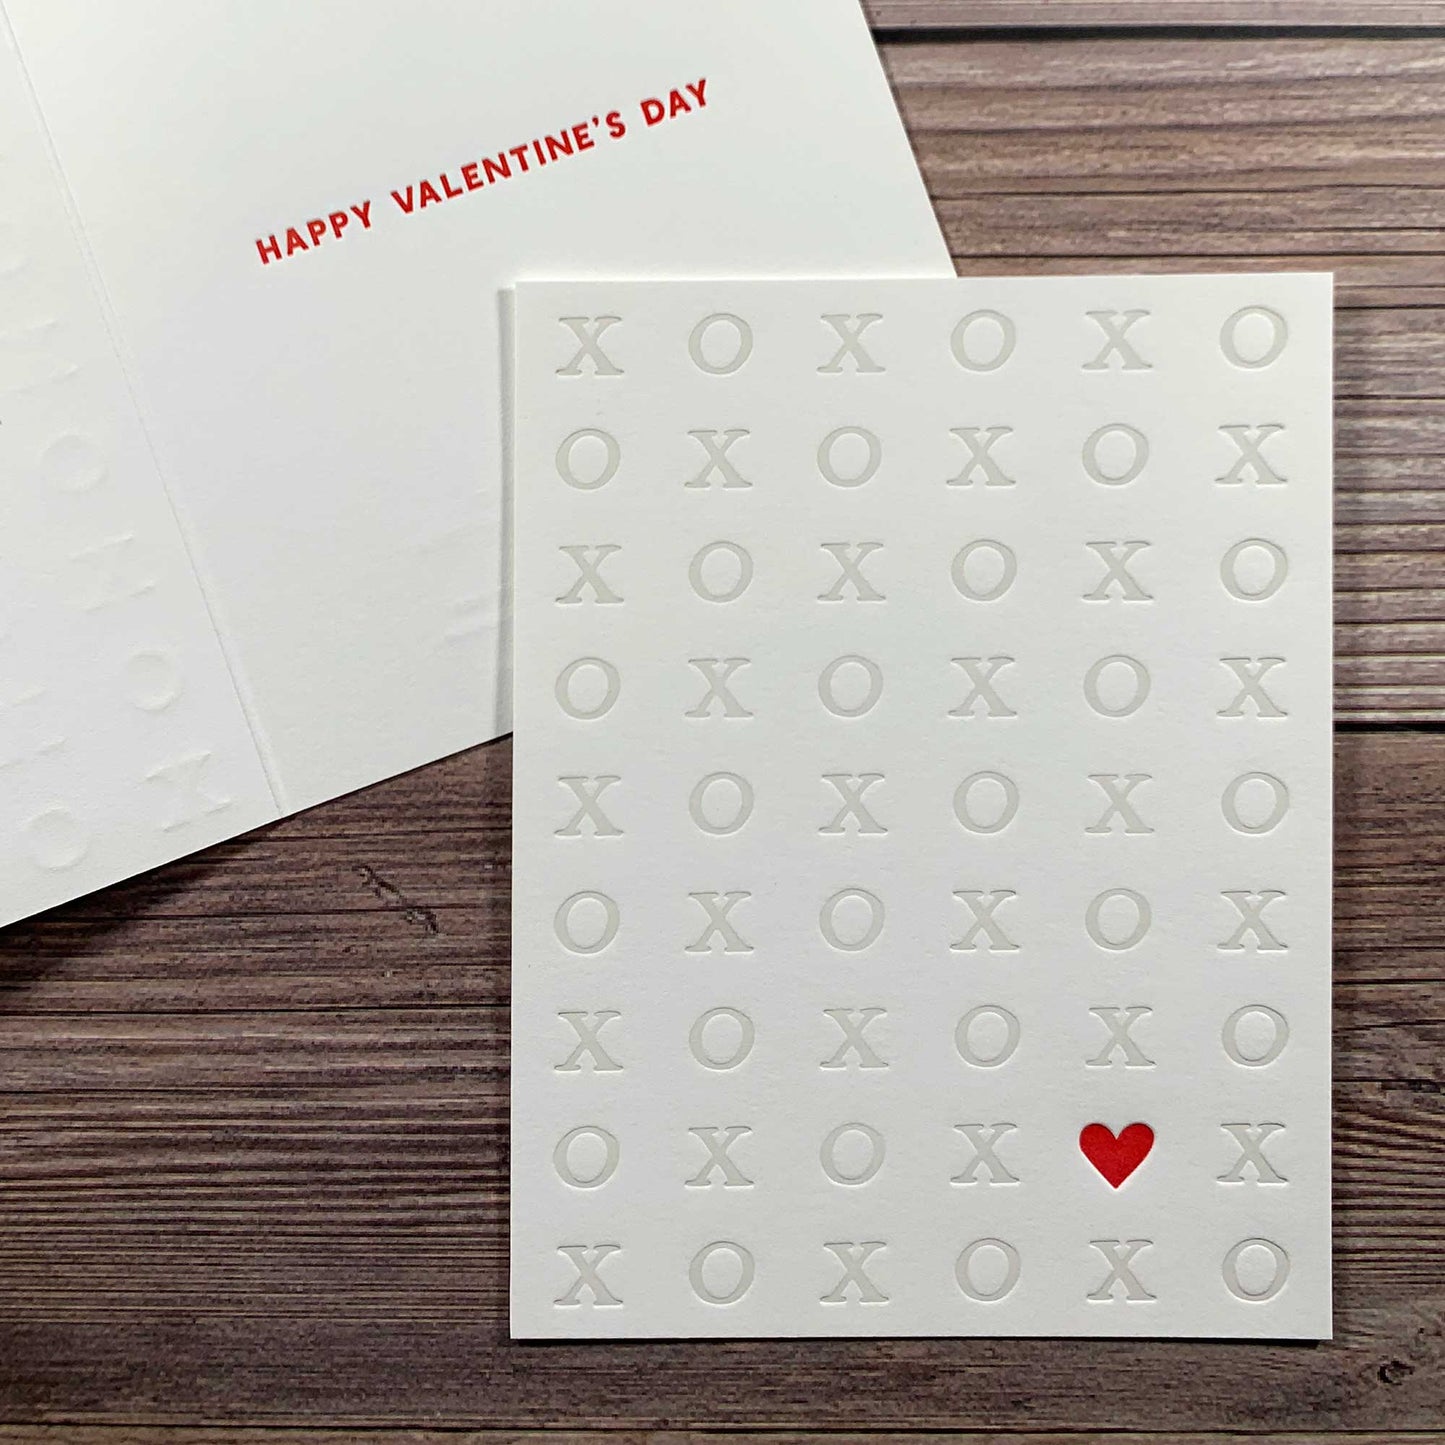 XOXO, Valentine's Day Card, message inside: Happy Valentine's Day, Letterpress printed, includes envelope